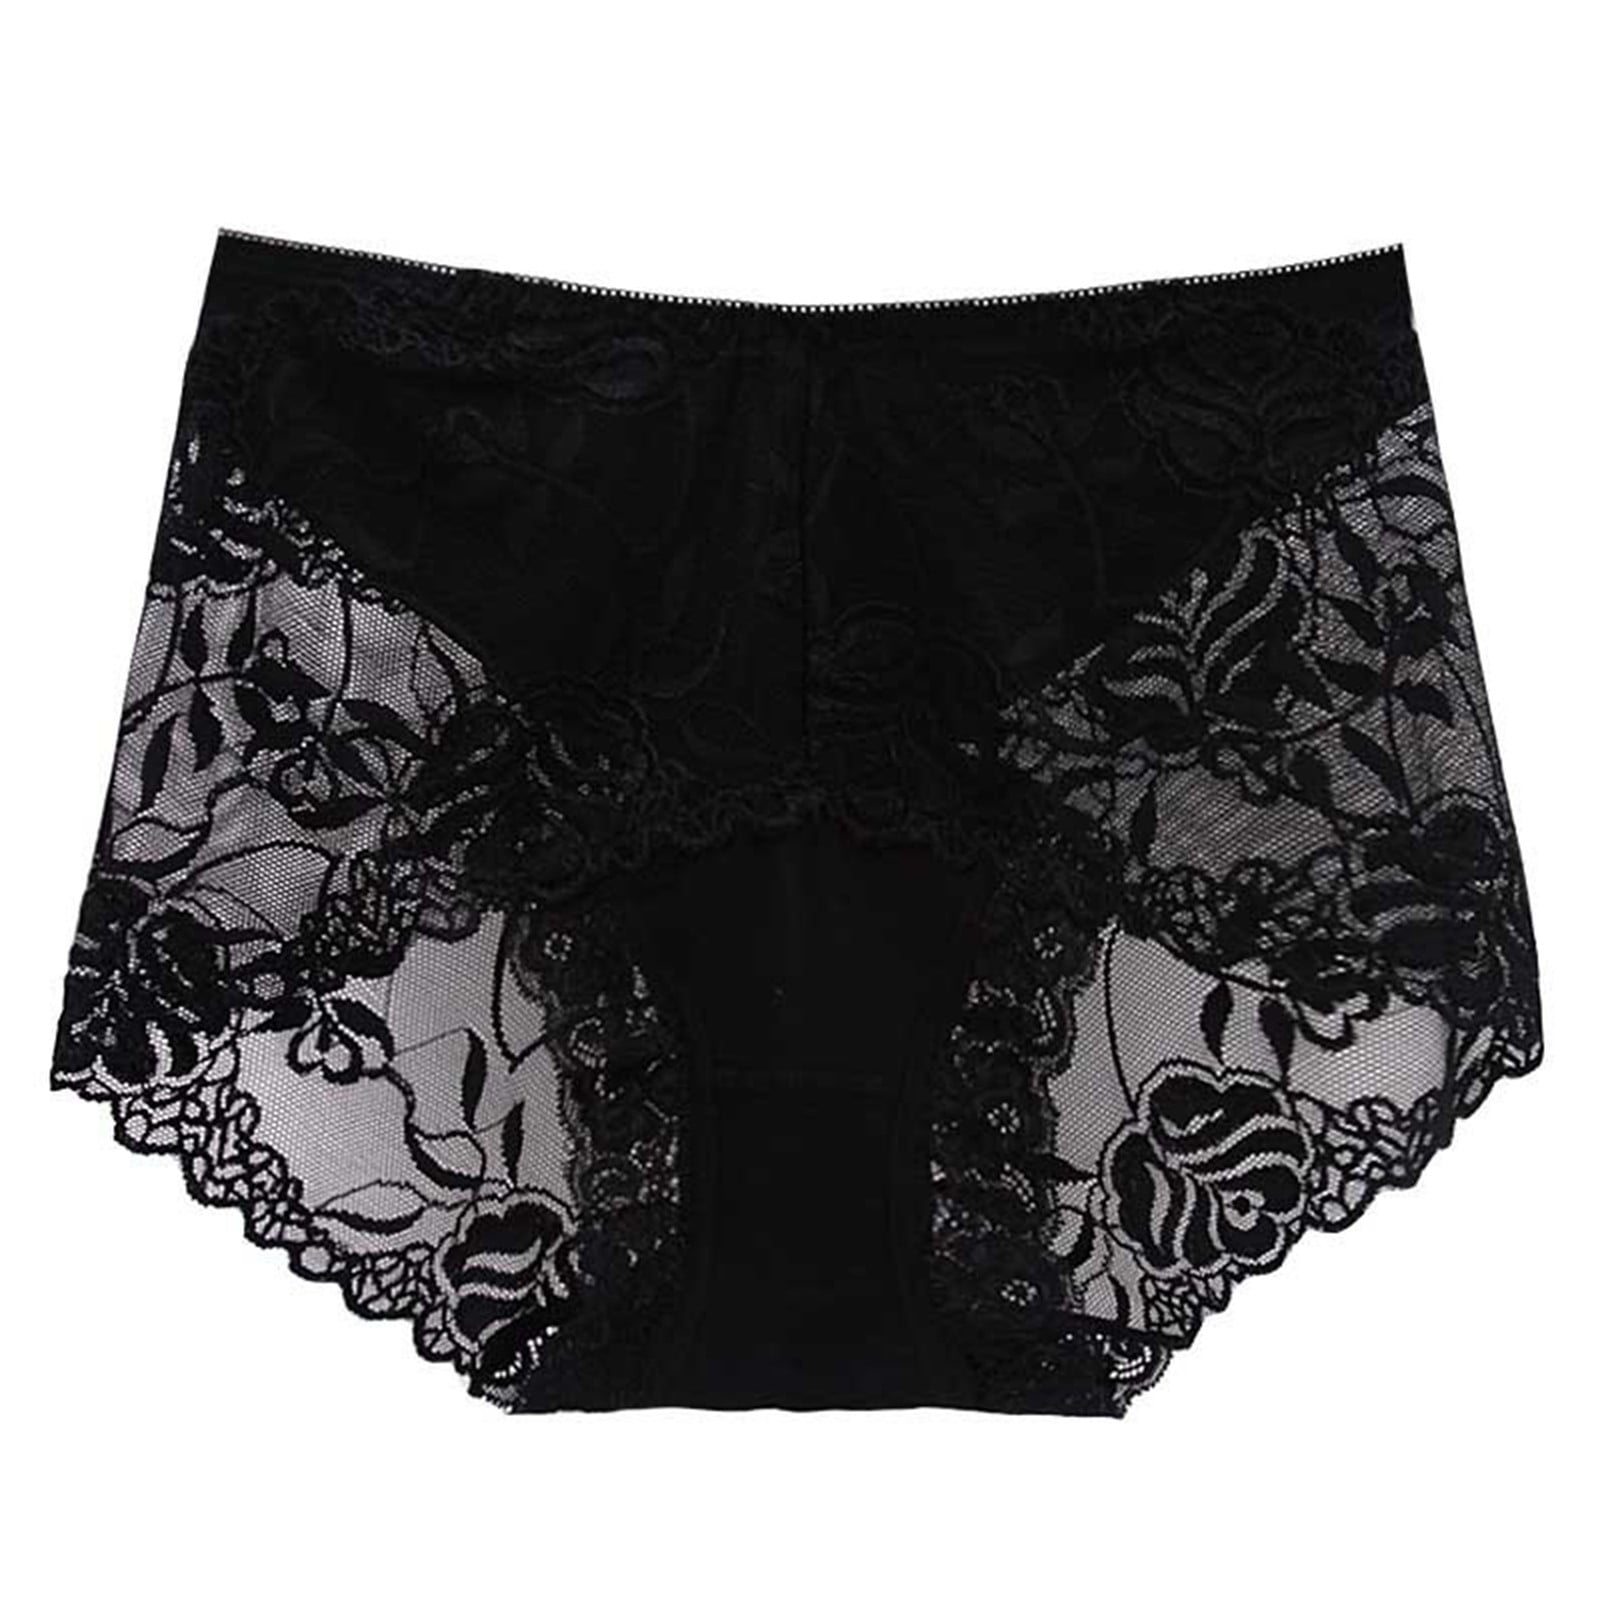 adviicd Lingery for Women Cotton High Waisted s Underwear Soft